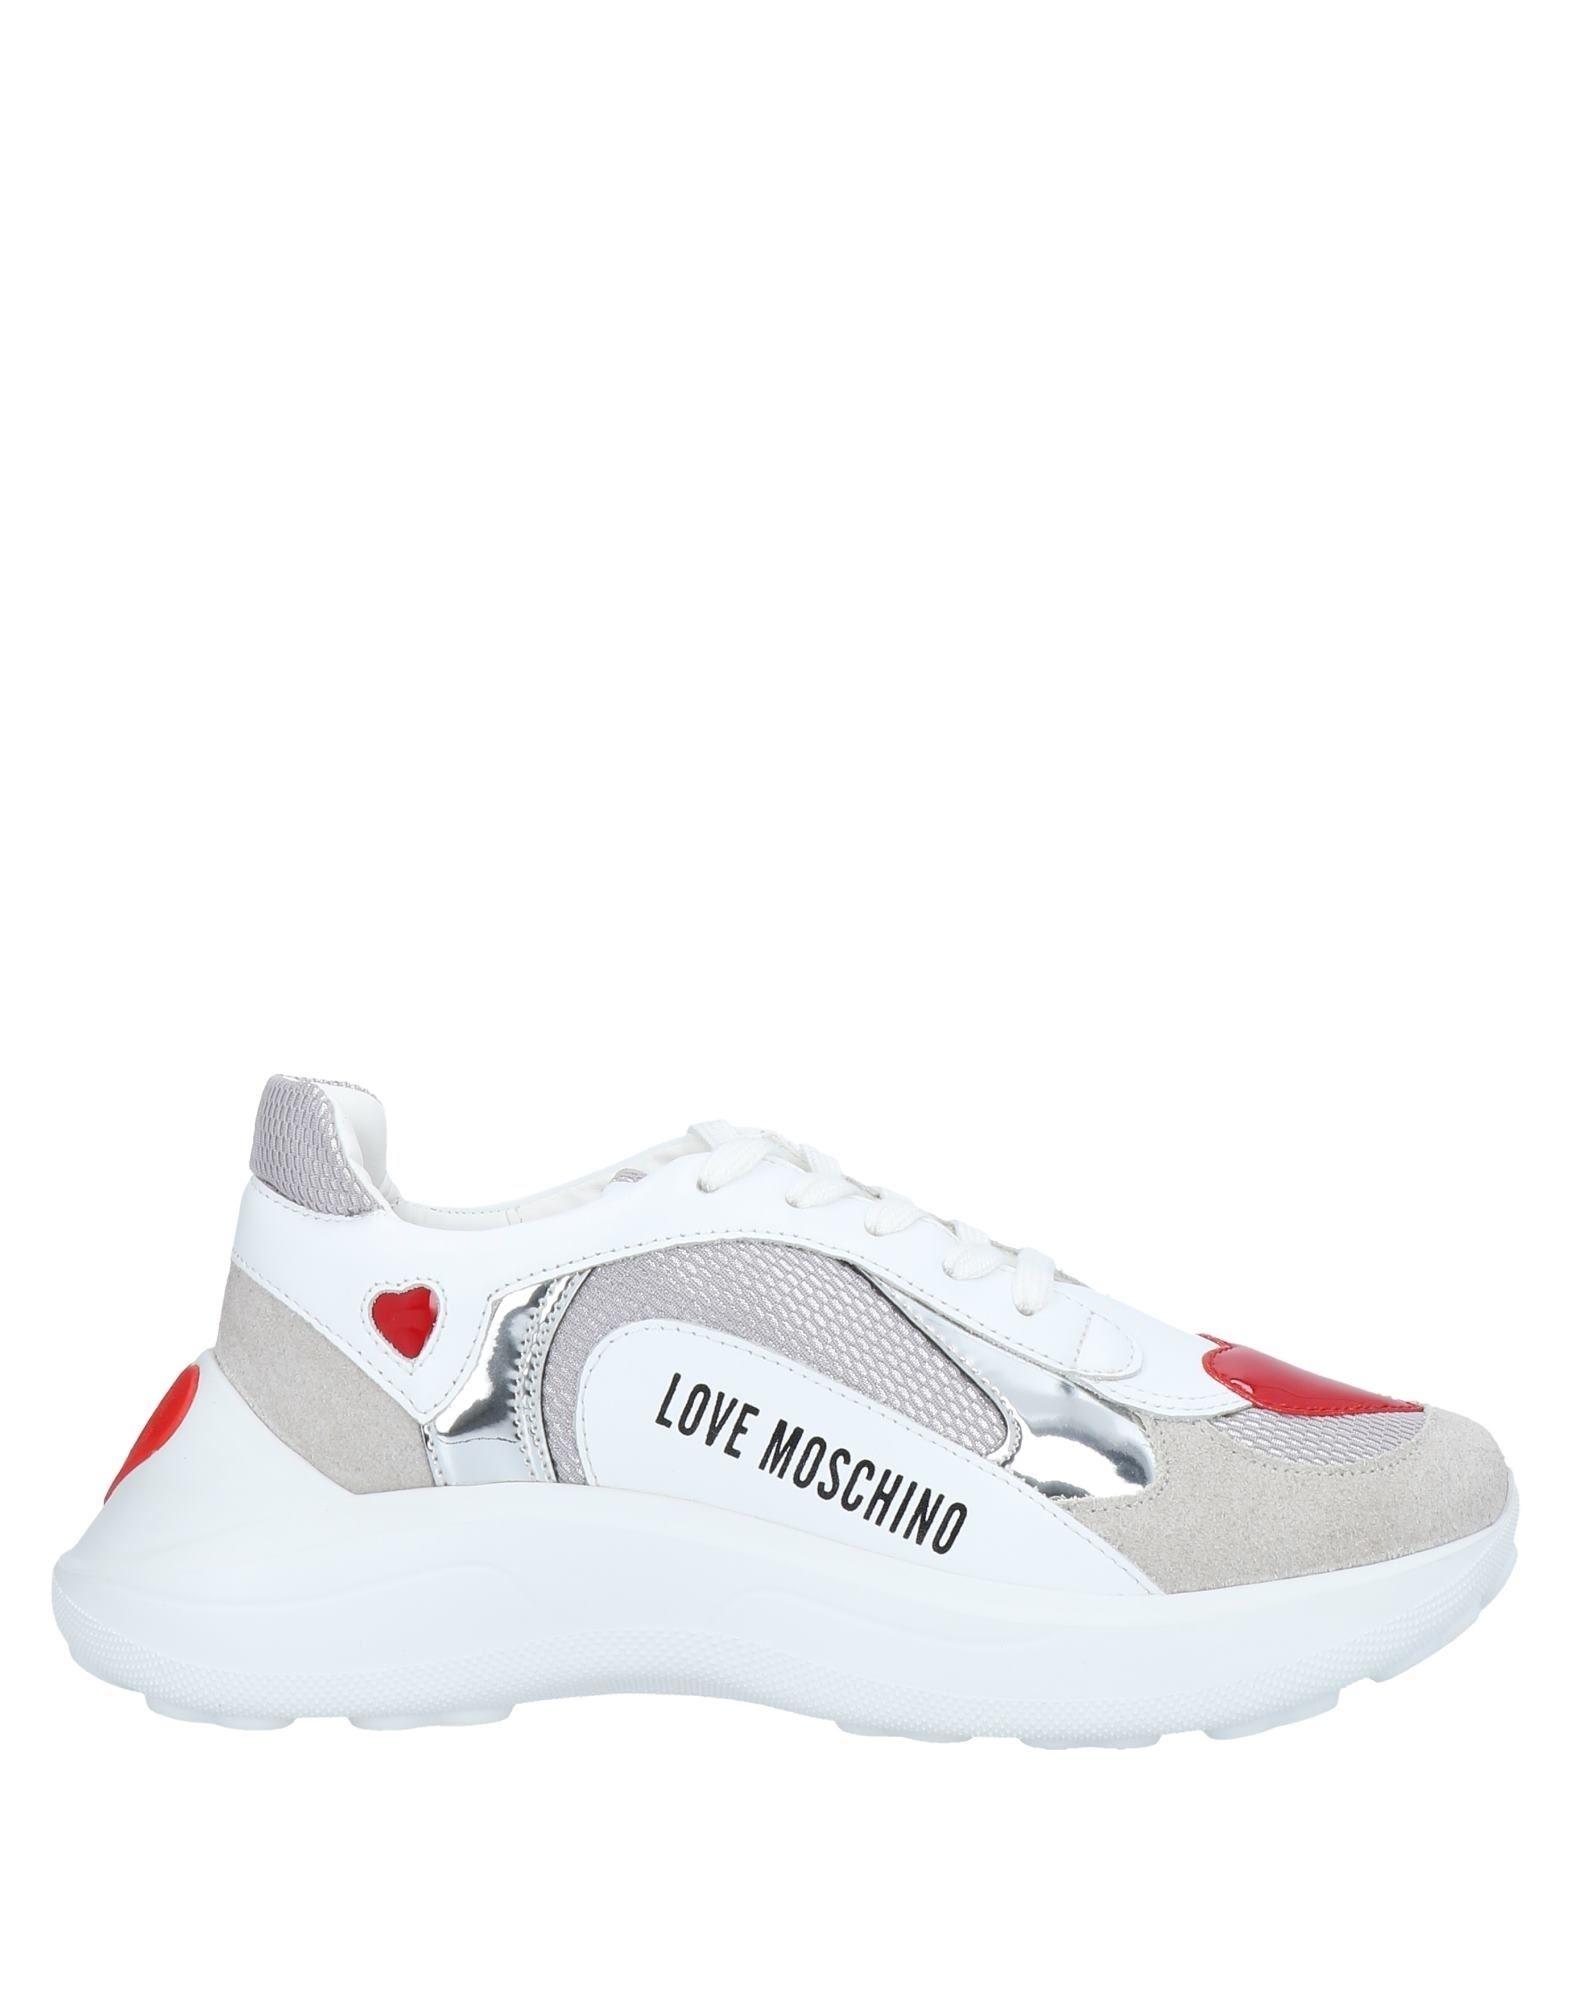 Love Moschino Trainers in Light Grey (White) - Lyst